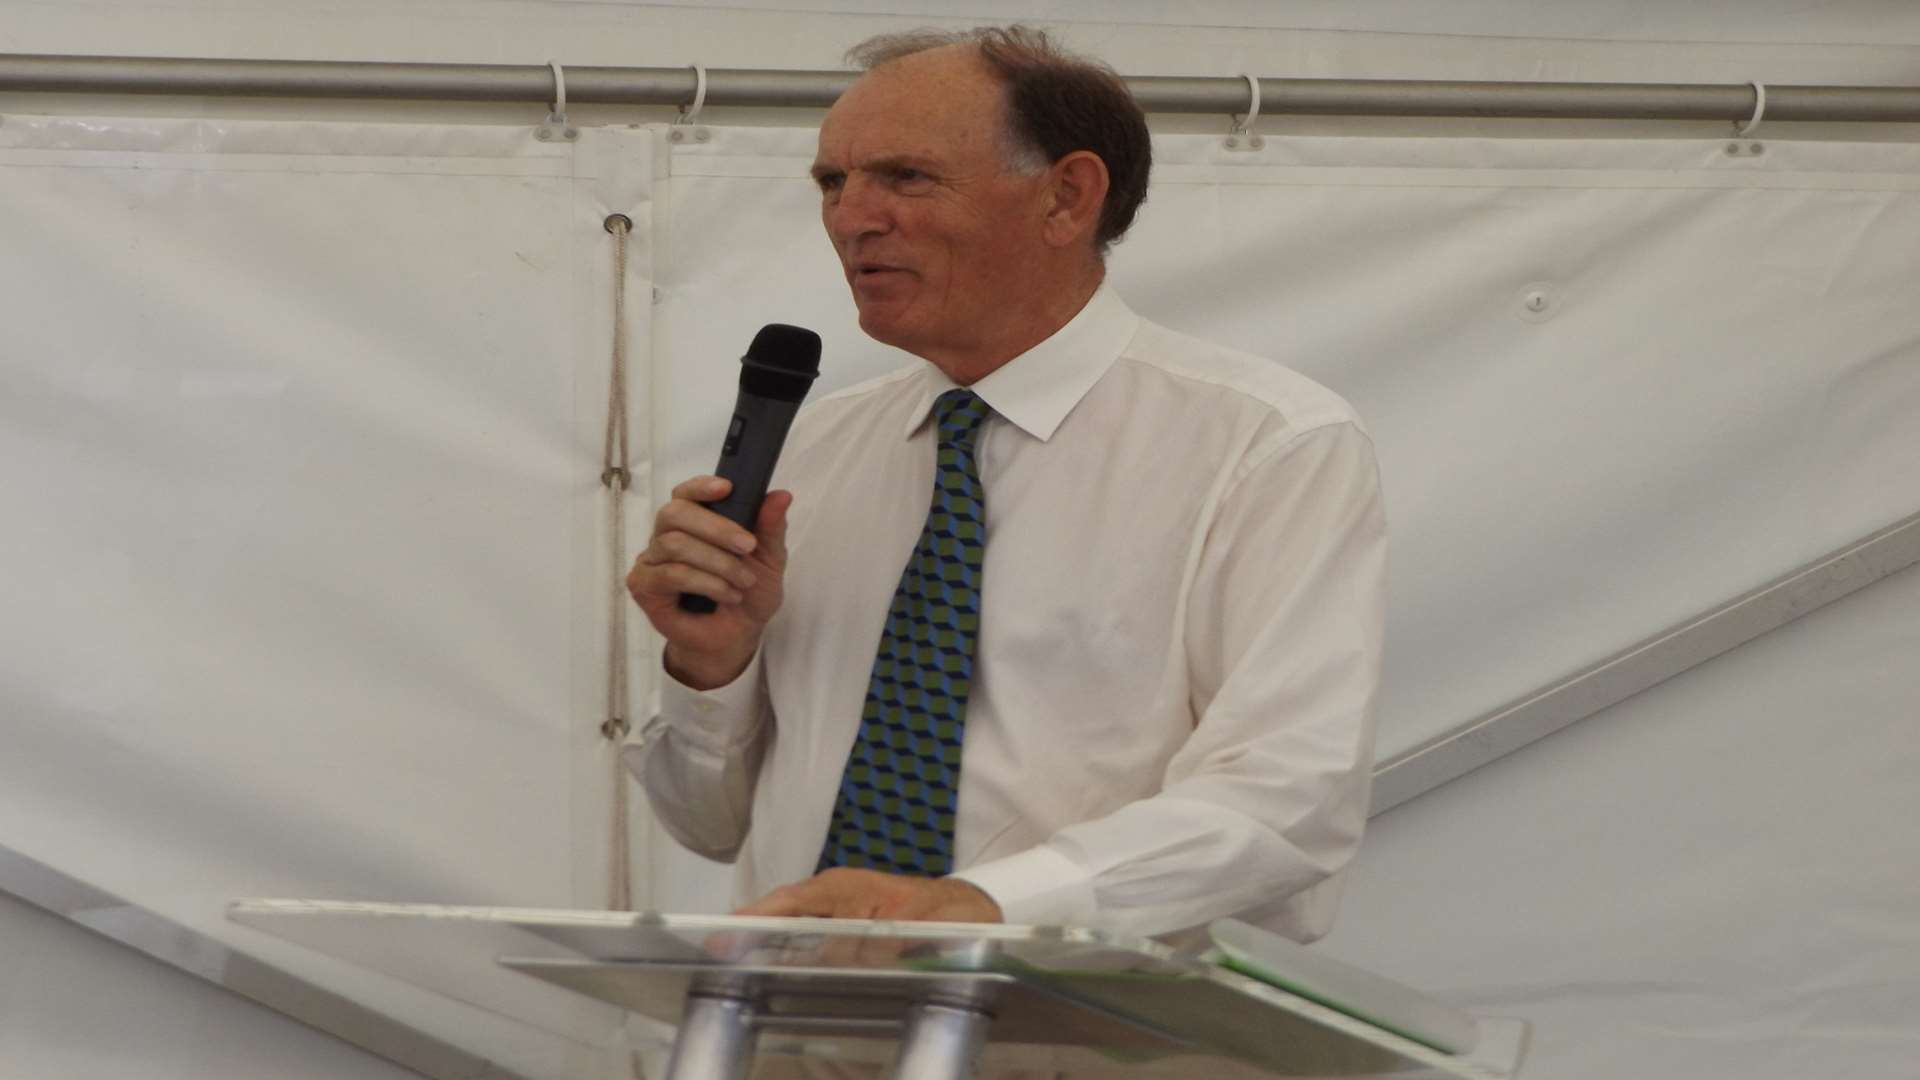 Natural England’s Chairman, Andrew Sells, speaking to the invited guests.